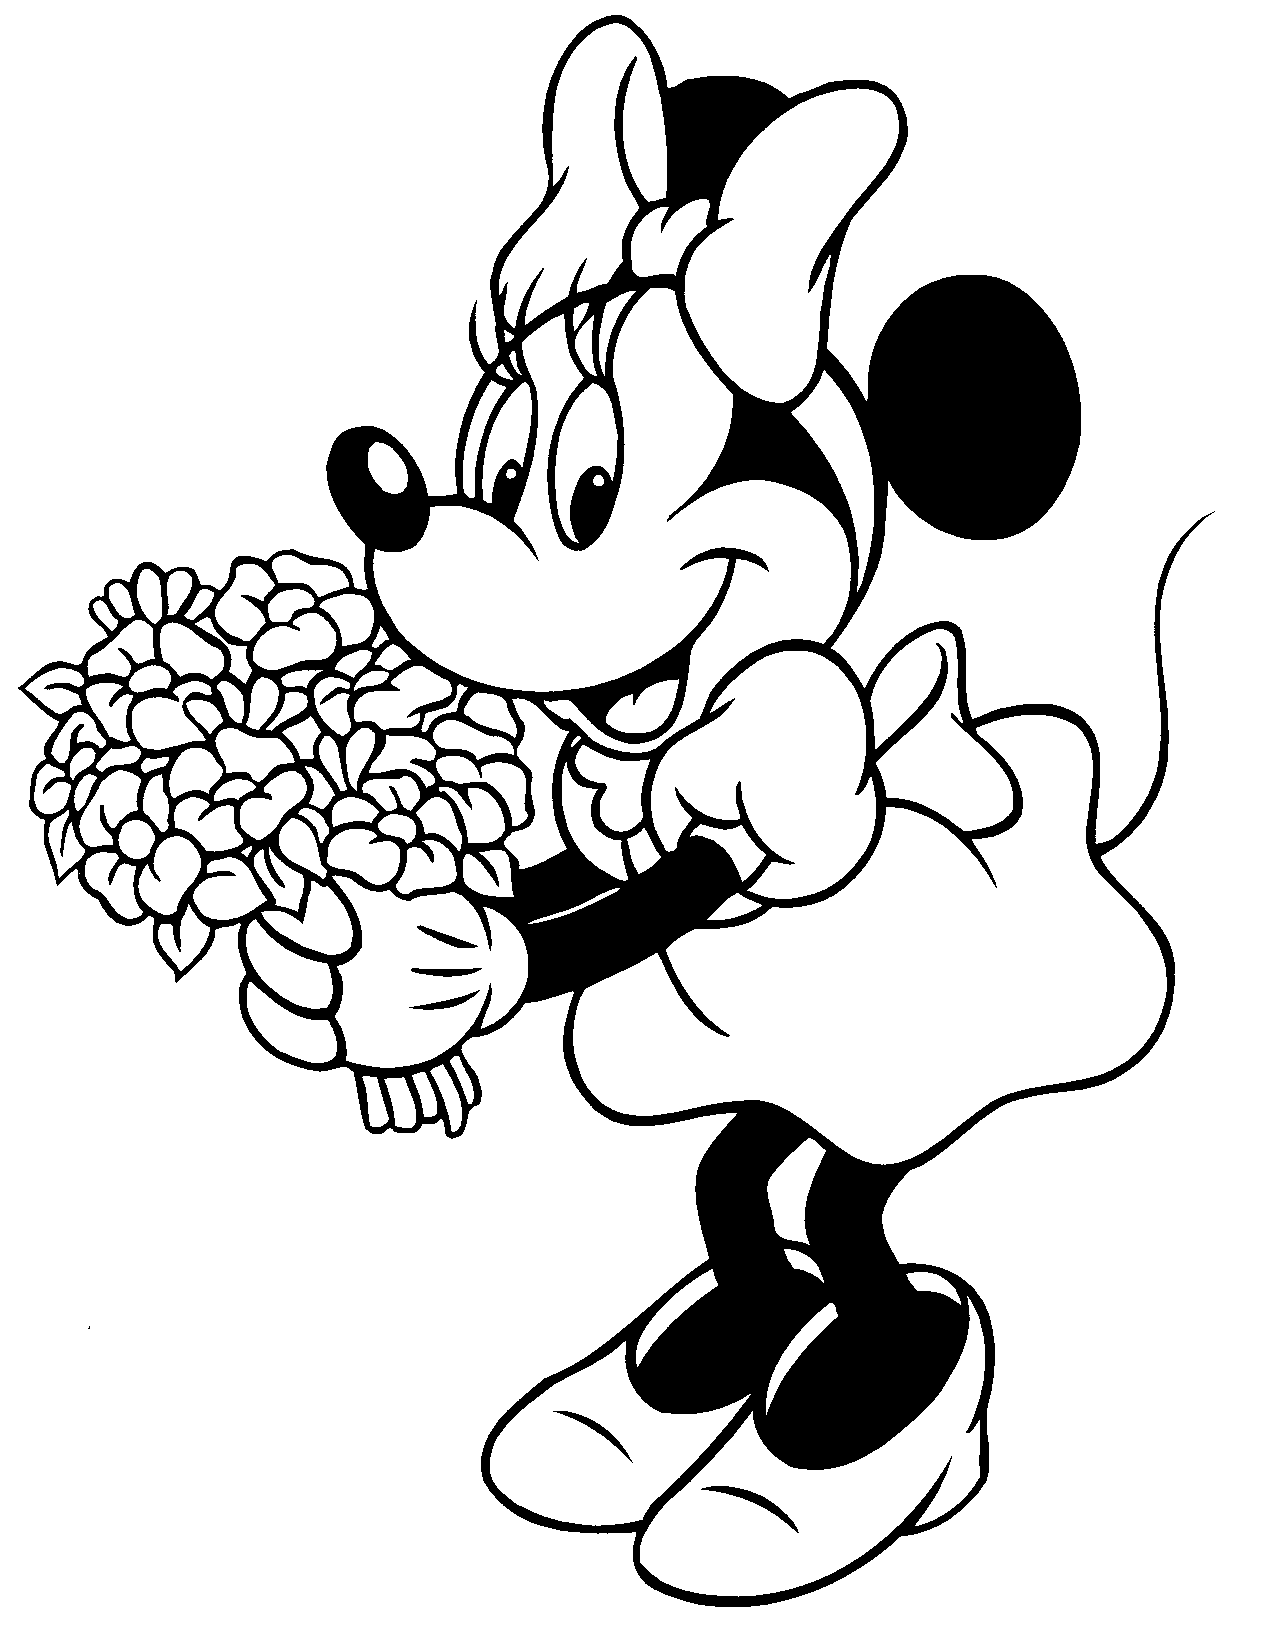 Mickey mouse black and white  - Mickey Mouse Clipart Black And White